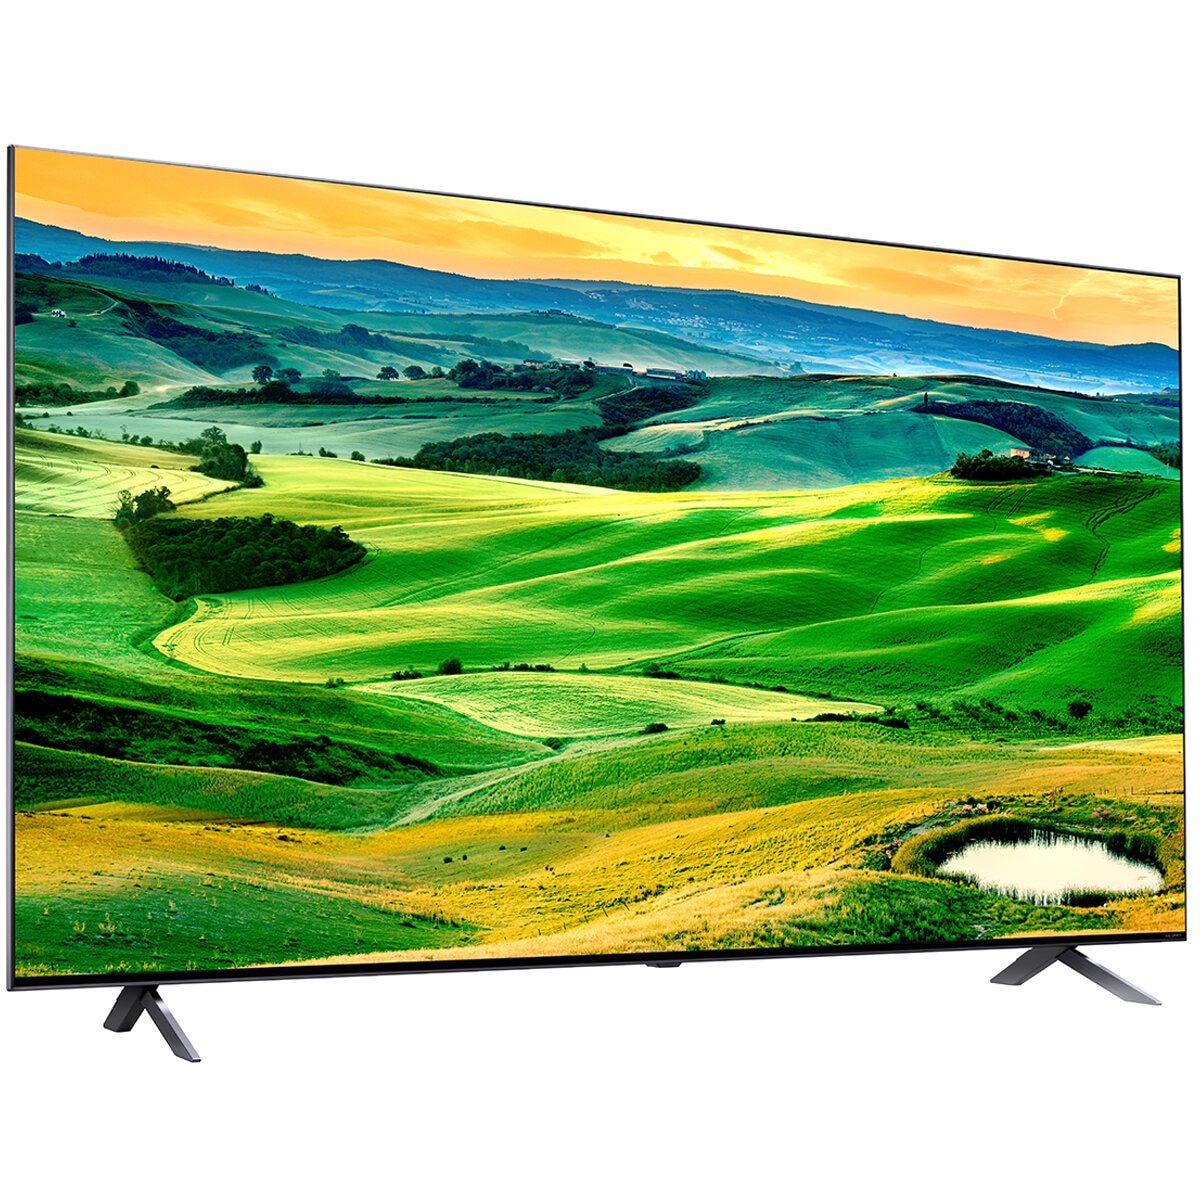 LG 75 Inch QNED80 4K Smart QNED TV 75QNED80SQA